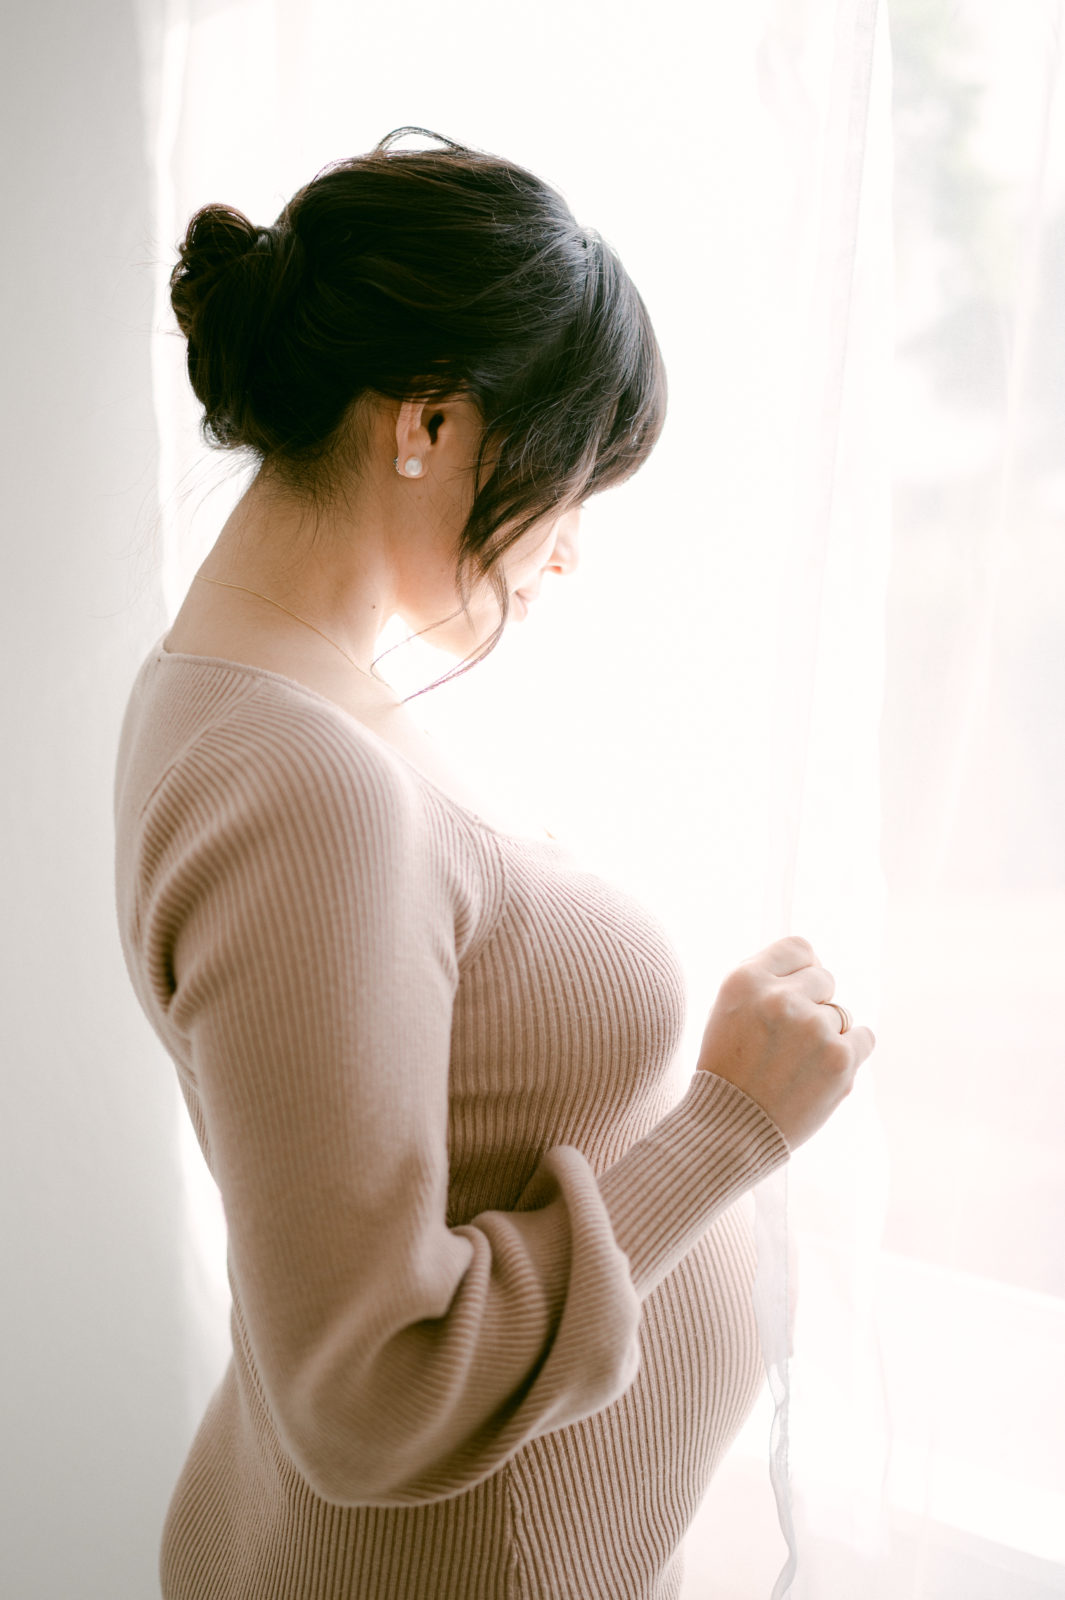 Pregnant woman looking out through the window